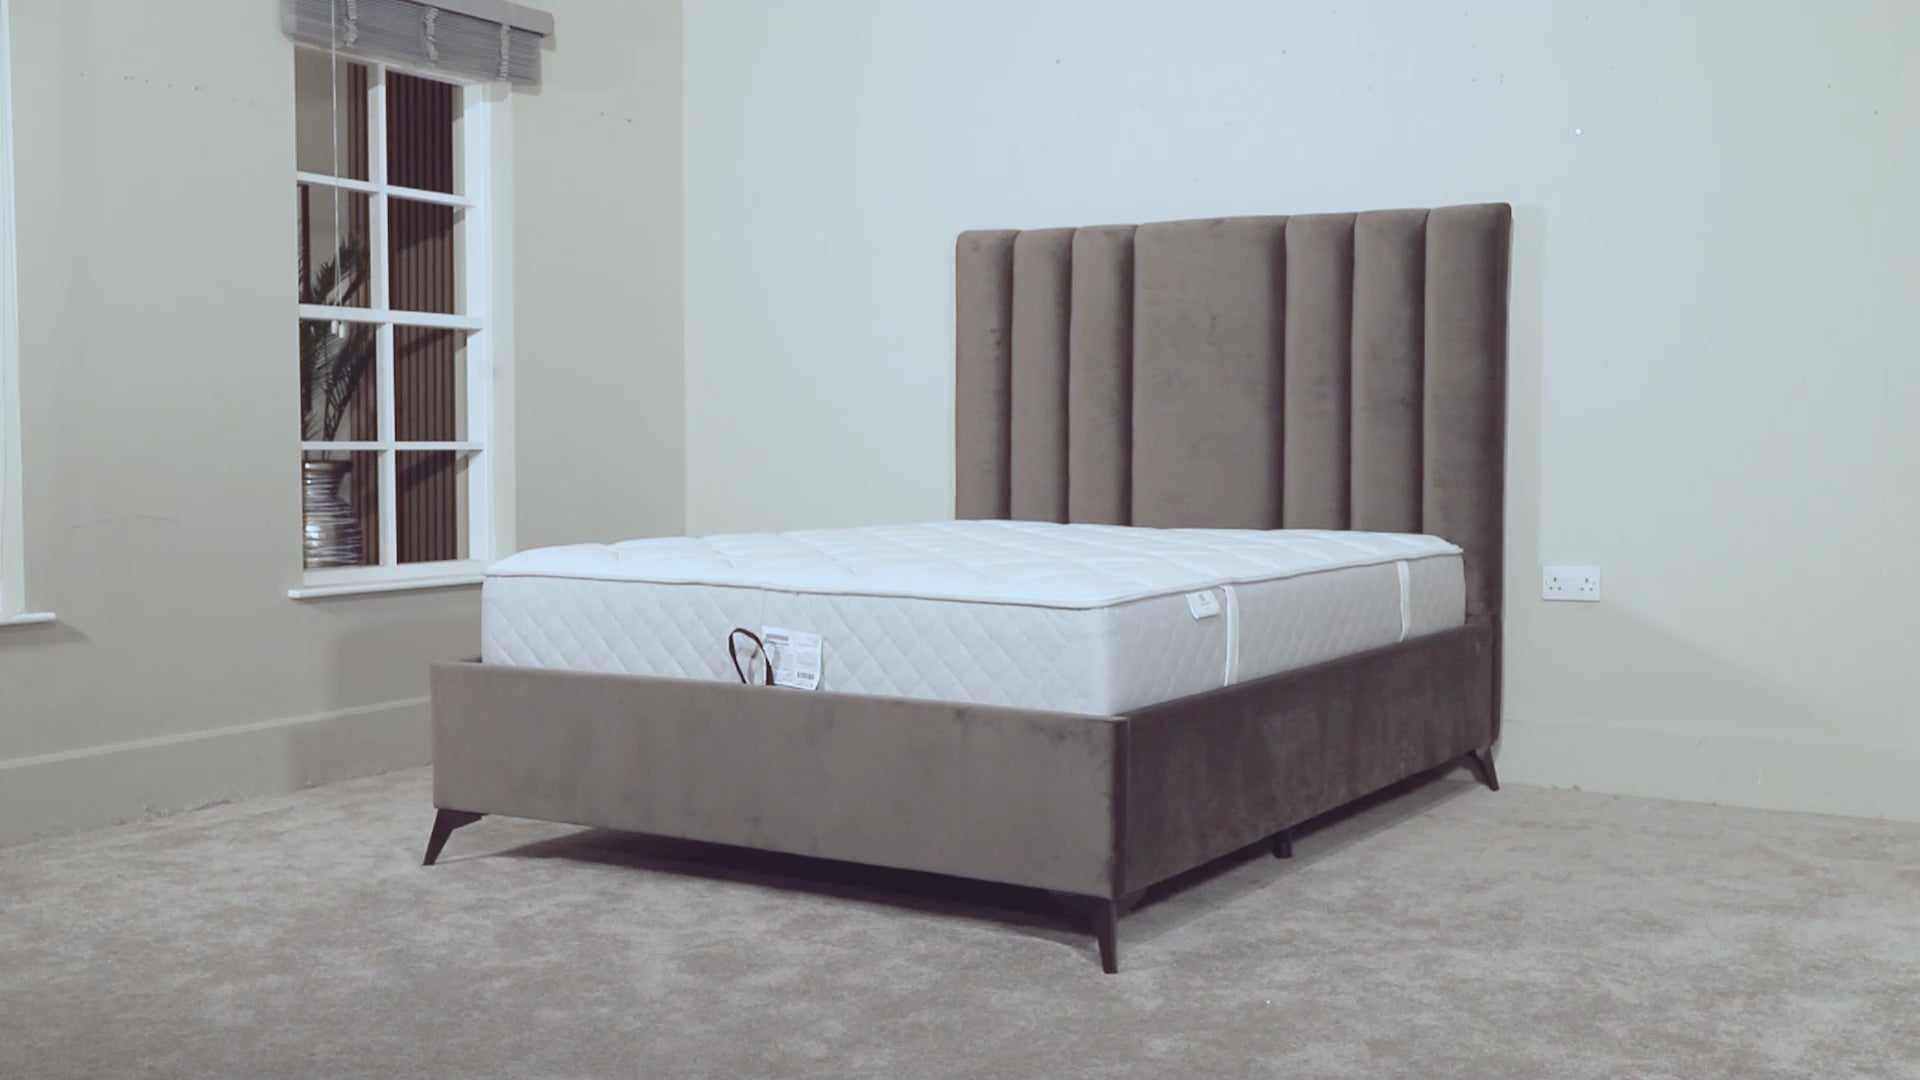  Maisey King Size Ottoman Bed - Grey